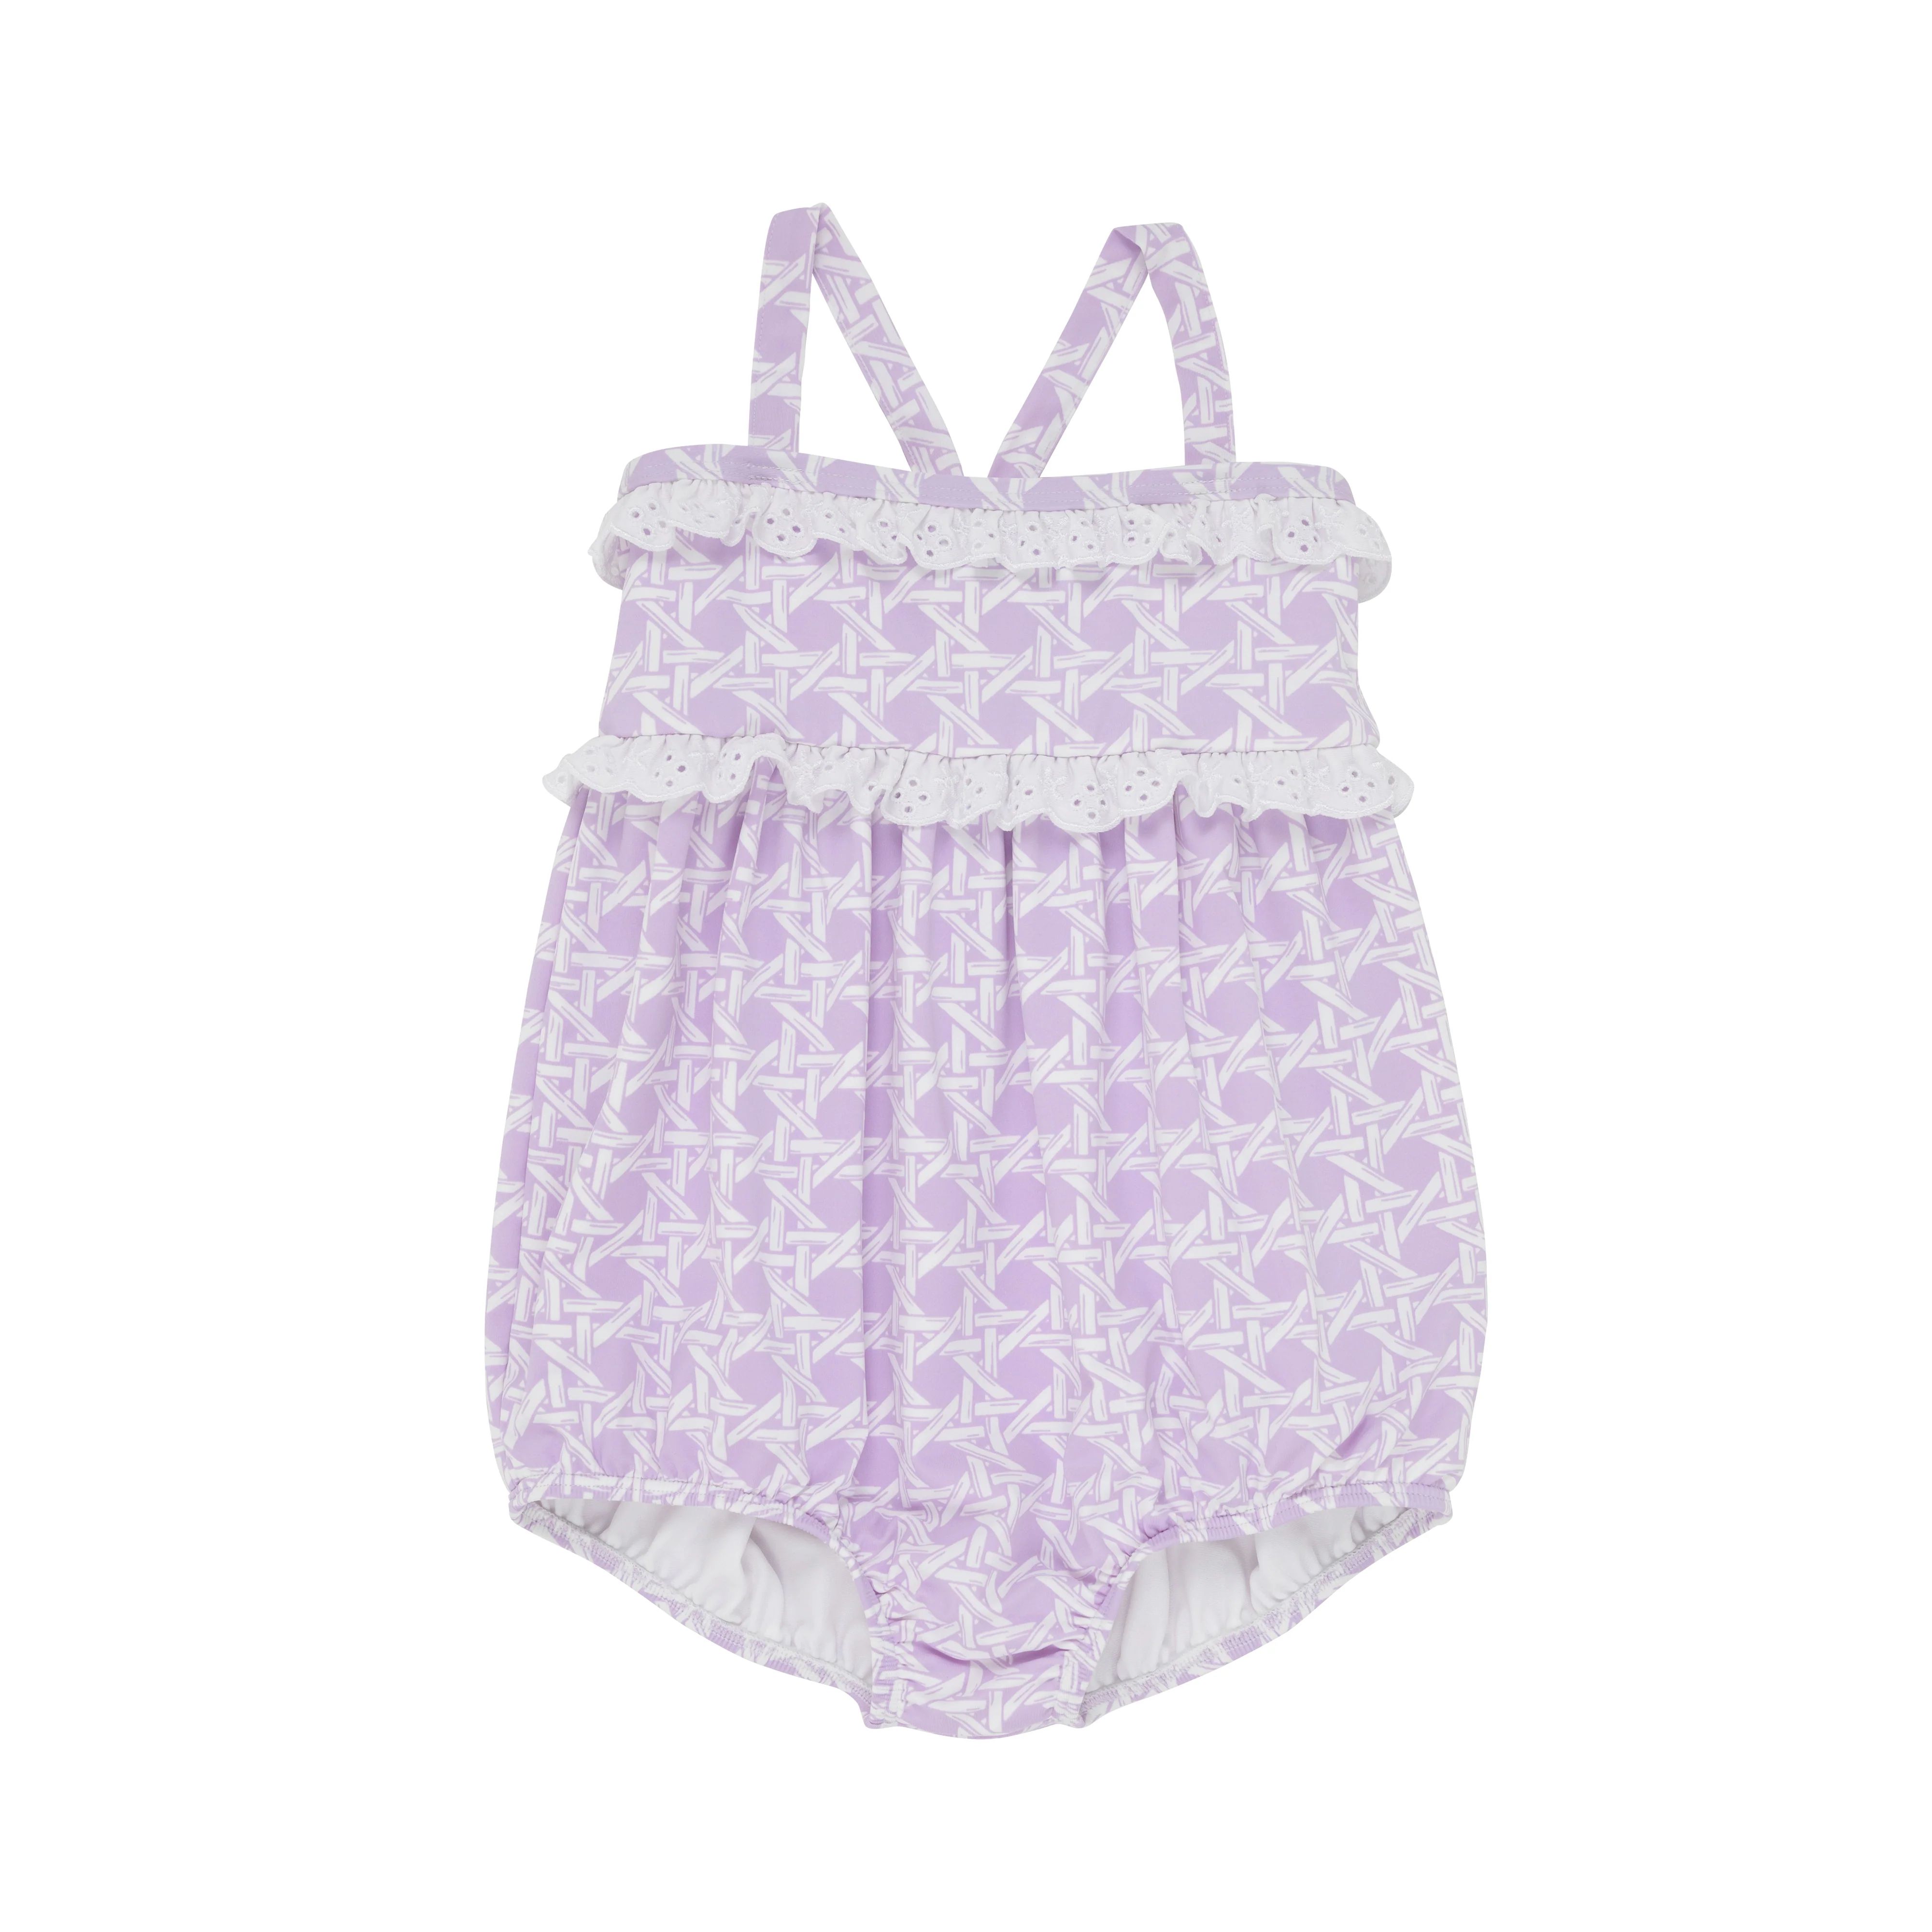 St. Bart's Bubble Bathing Suit - Ocean Club Cane with Palm Beach Pink & Worth Avenue White Eyelet | The Beaufort Bonnet Company